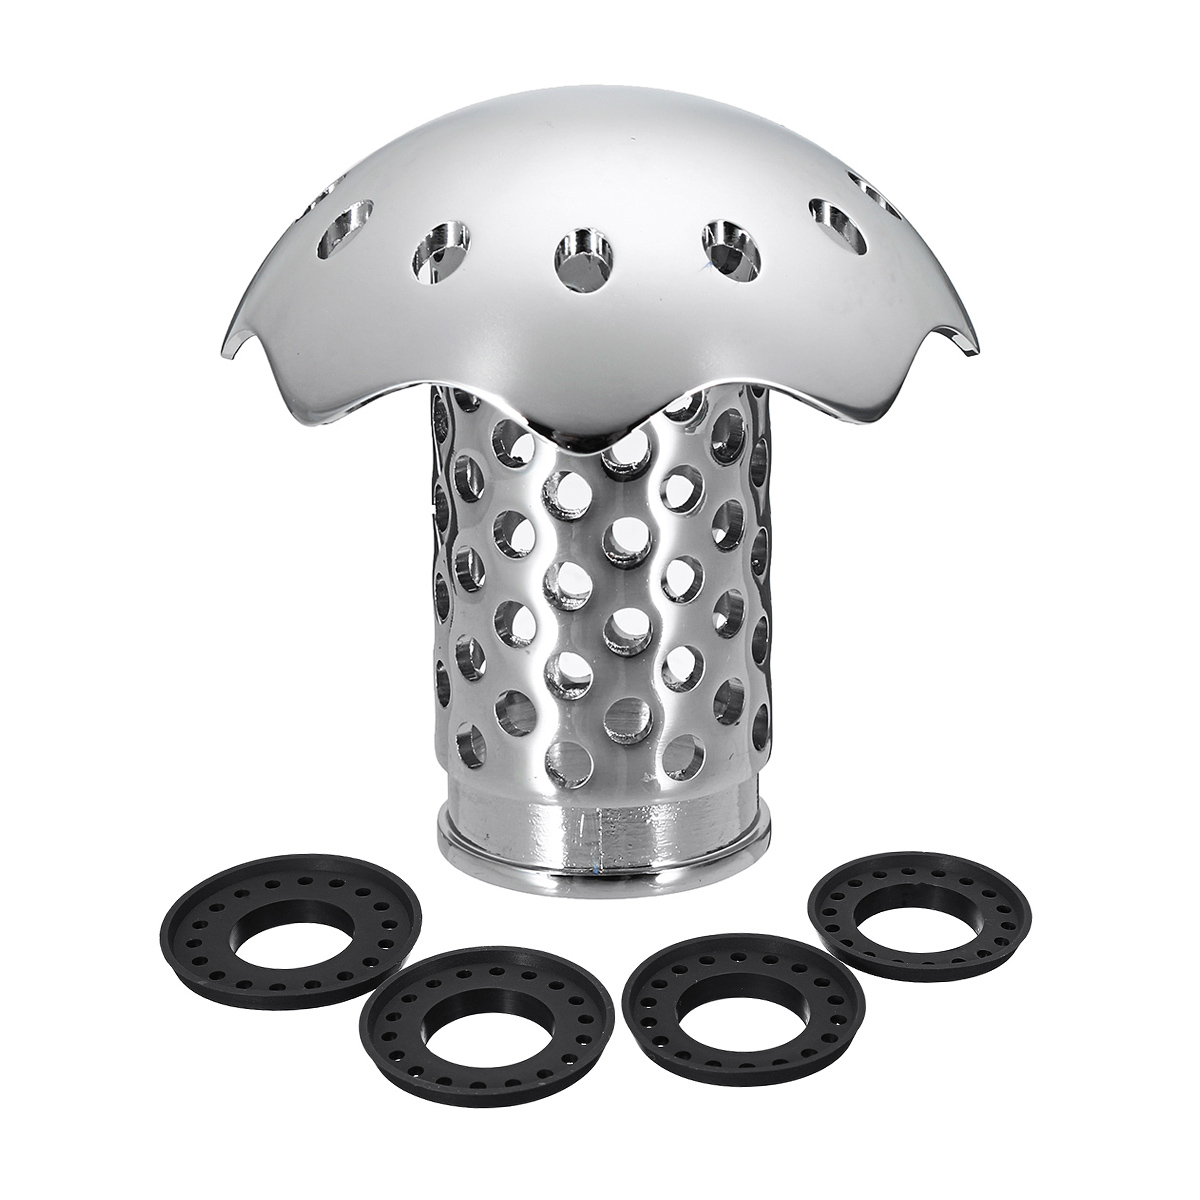 

Stainless Steel Bath Tub Floor Drain Stopper Protector Hair Catcher Strainer+4 Rubbers